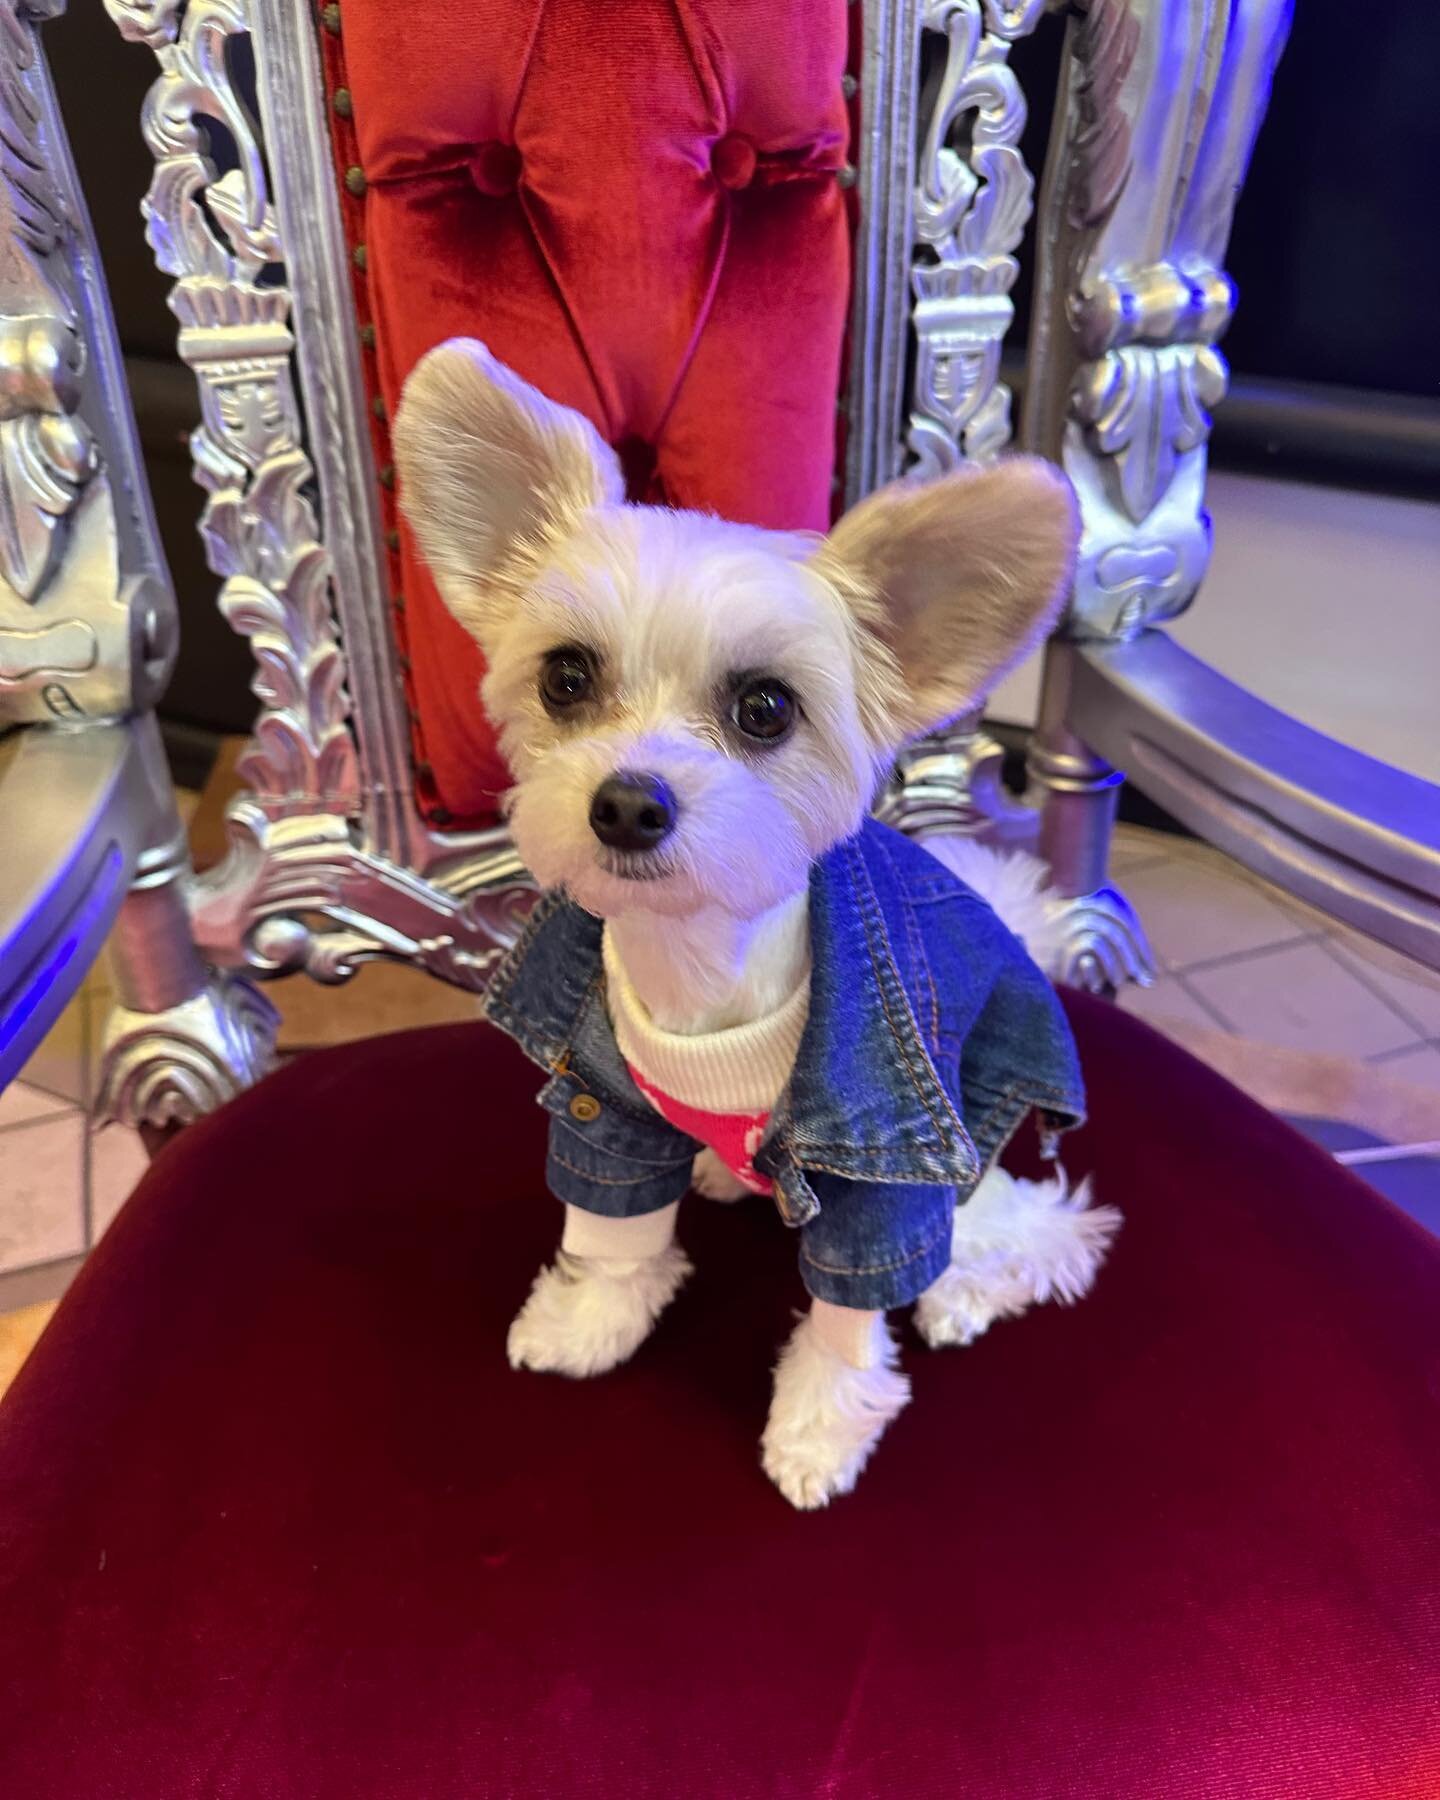 &ldquo;Some behind the scenes photos of me having fun on set&rdquo; - Belle 🦄🐶👑🎬
.
.
.
.
#dogactor #dogsofnyc #dogsofnewyork #cutenessoverload #setlife🎬 #doginfluencers #famousdogs